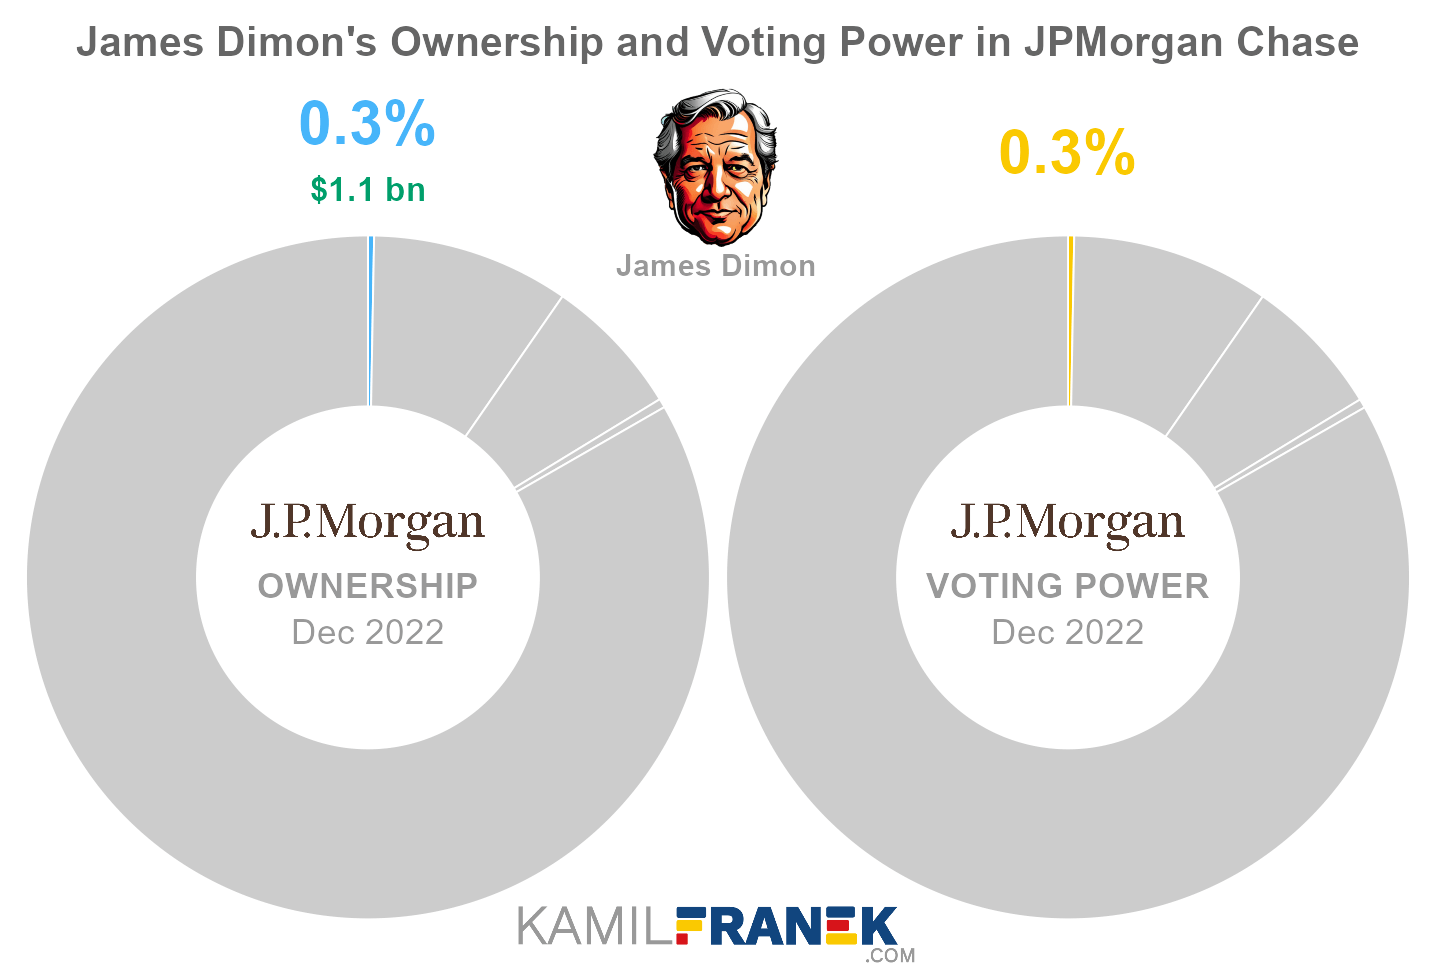 James Dimon's share ownership and voting power in JPMorgan Chase (chart)